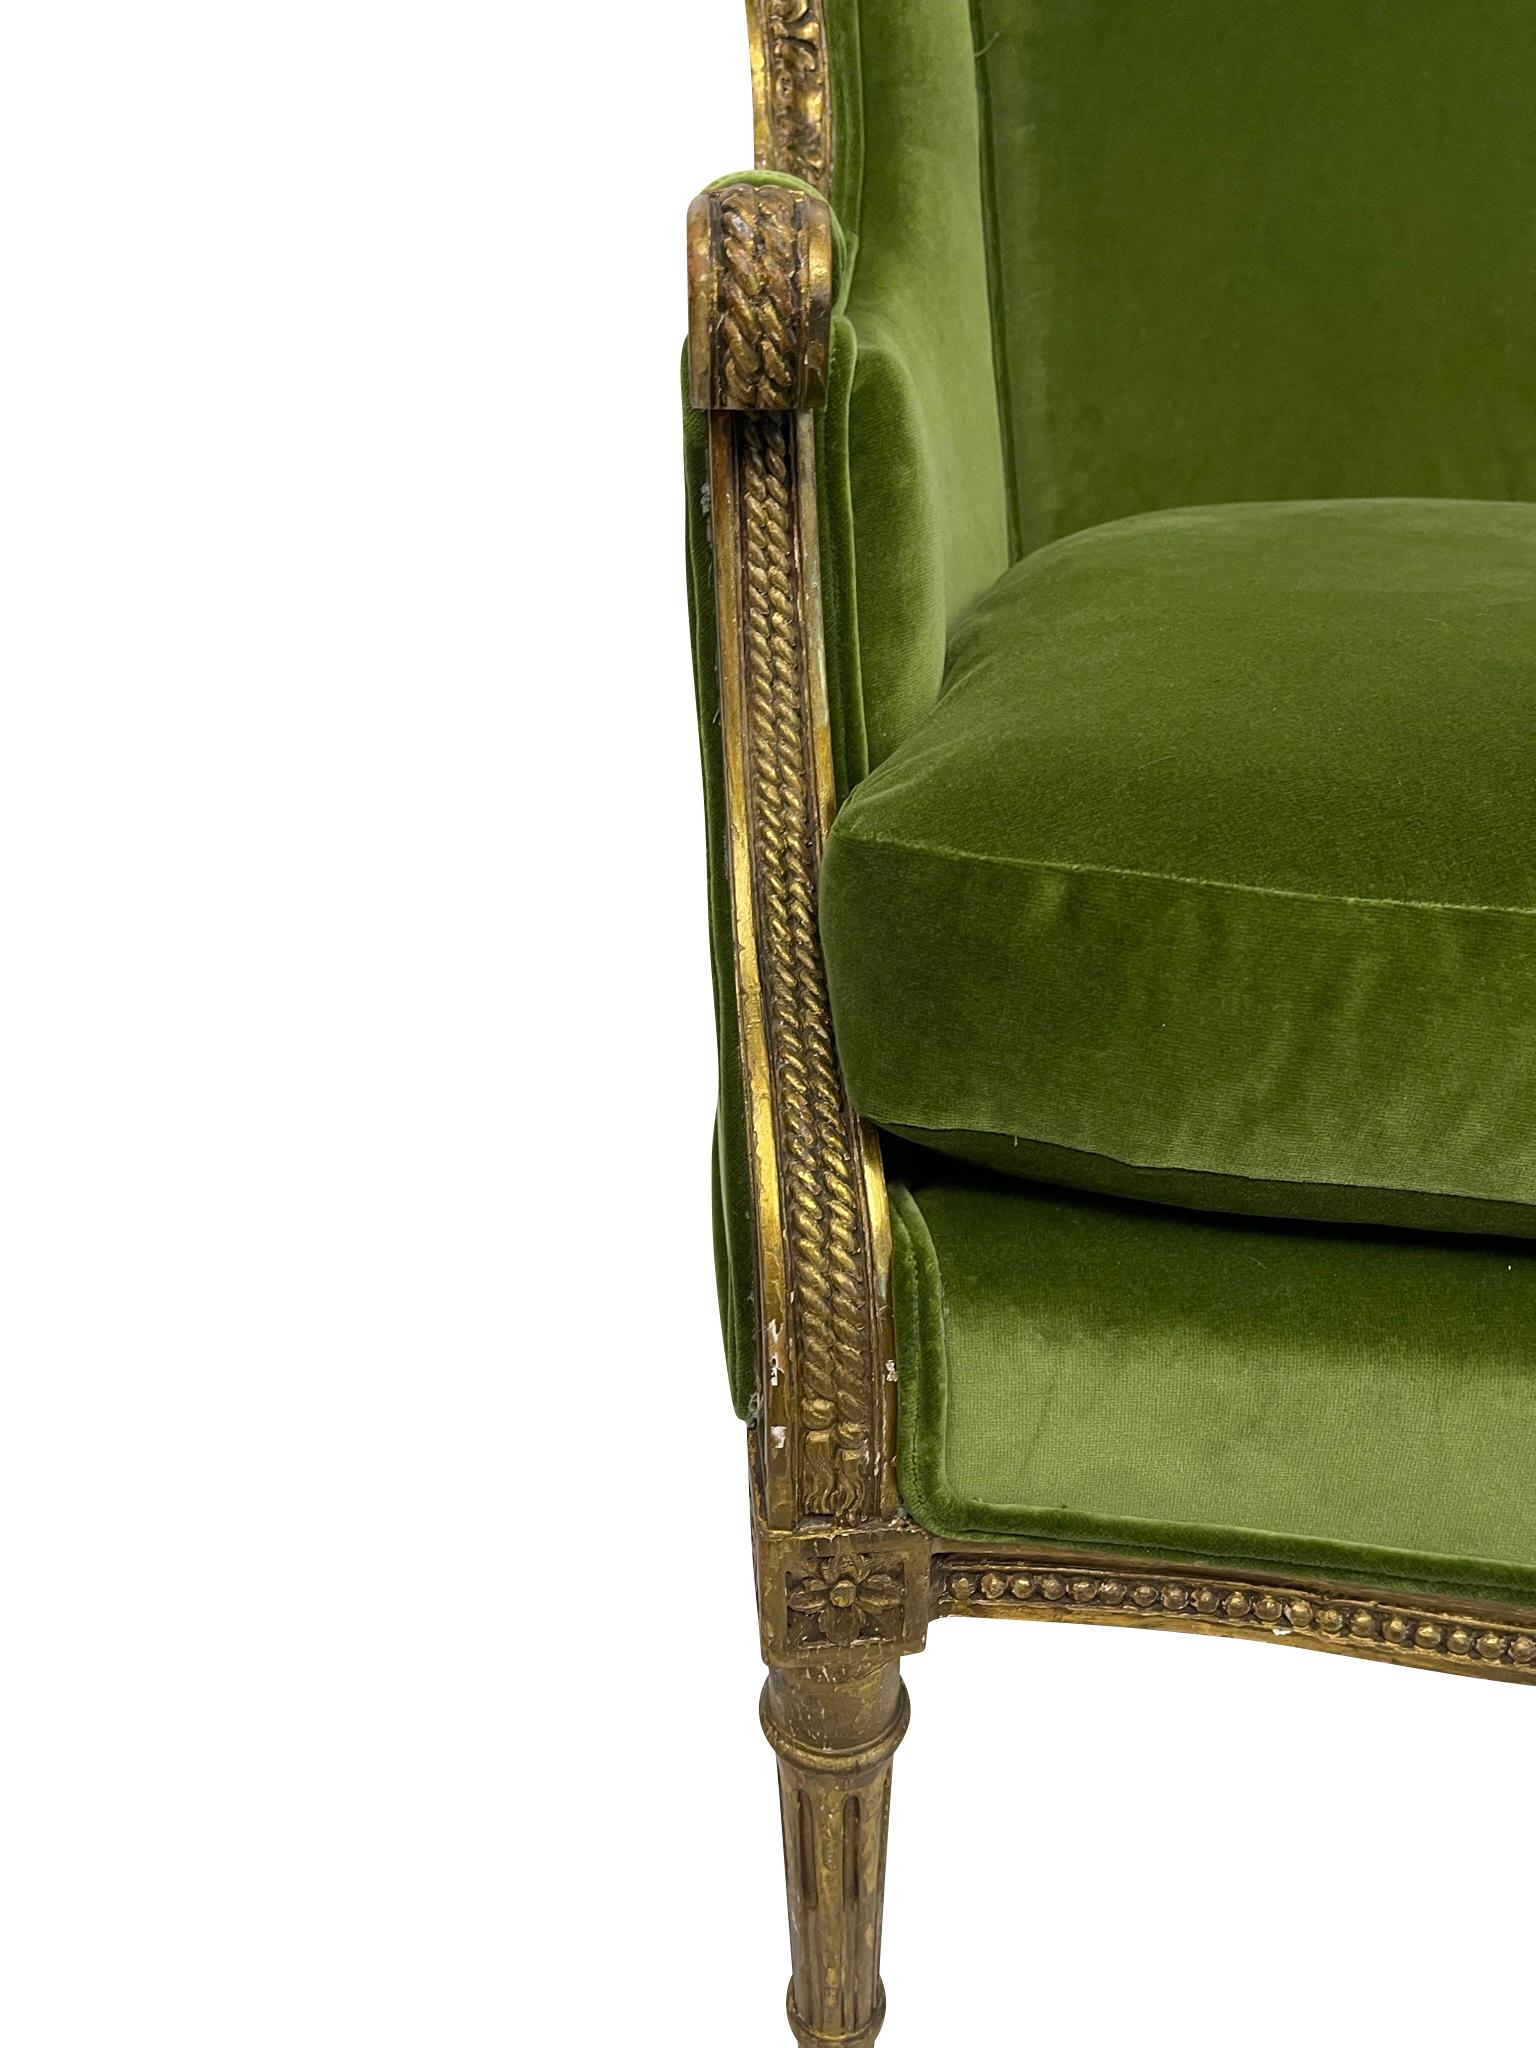 Early 20th or late 19th century Louis XVI Bergere wing chair in carved giltwood.  High comfortable back with lovely foliate carved detail around the back of the wing, ending in reeded arms with rope detail and reeded legs ending in toupie feet.  The